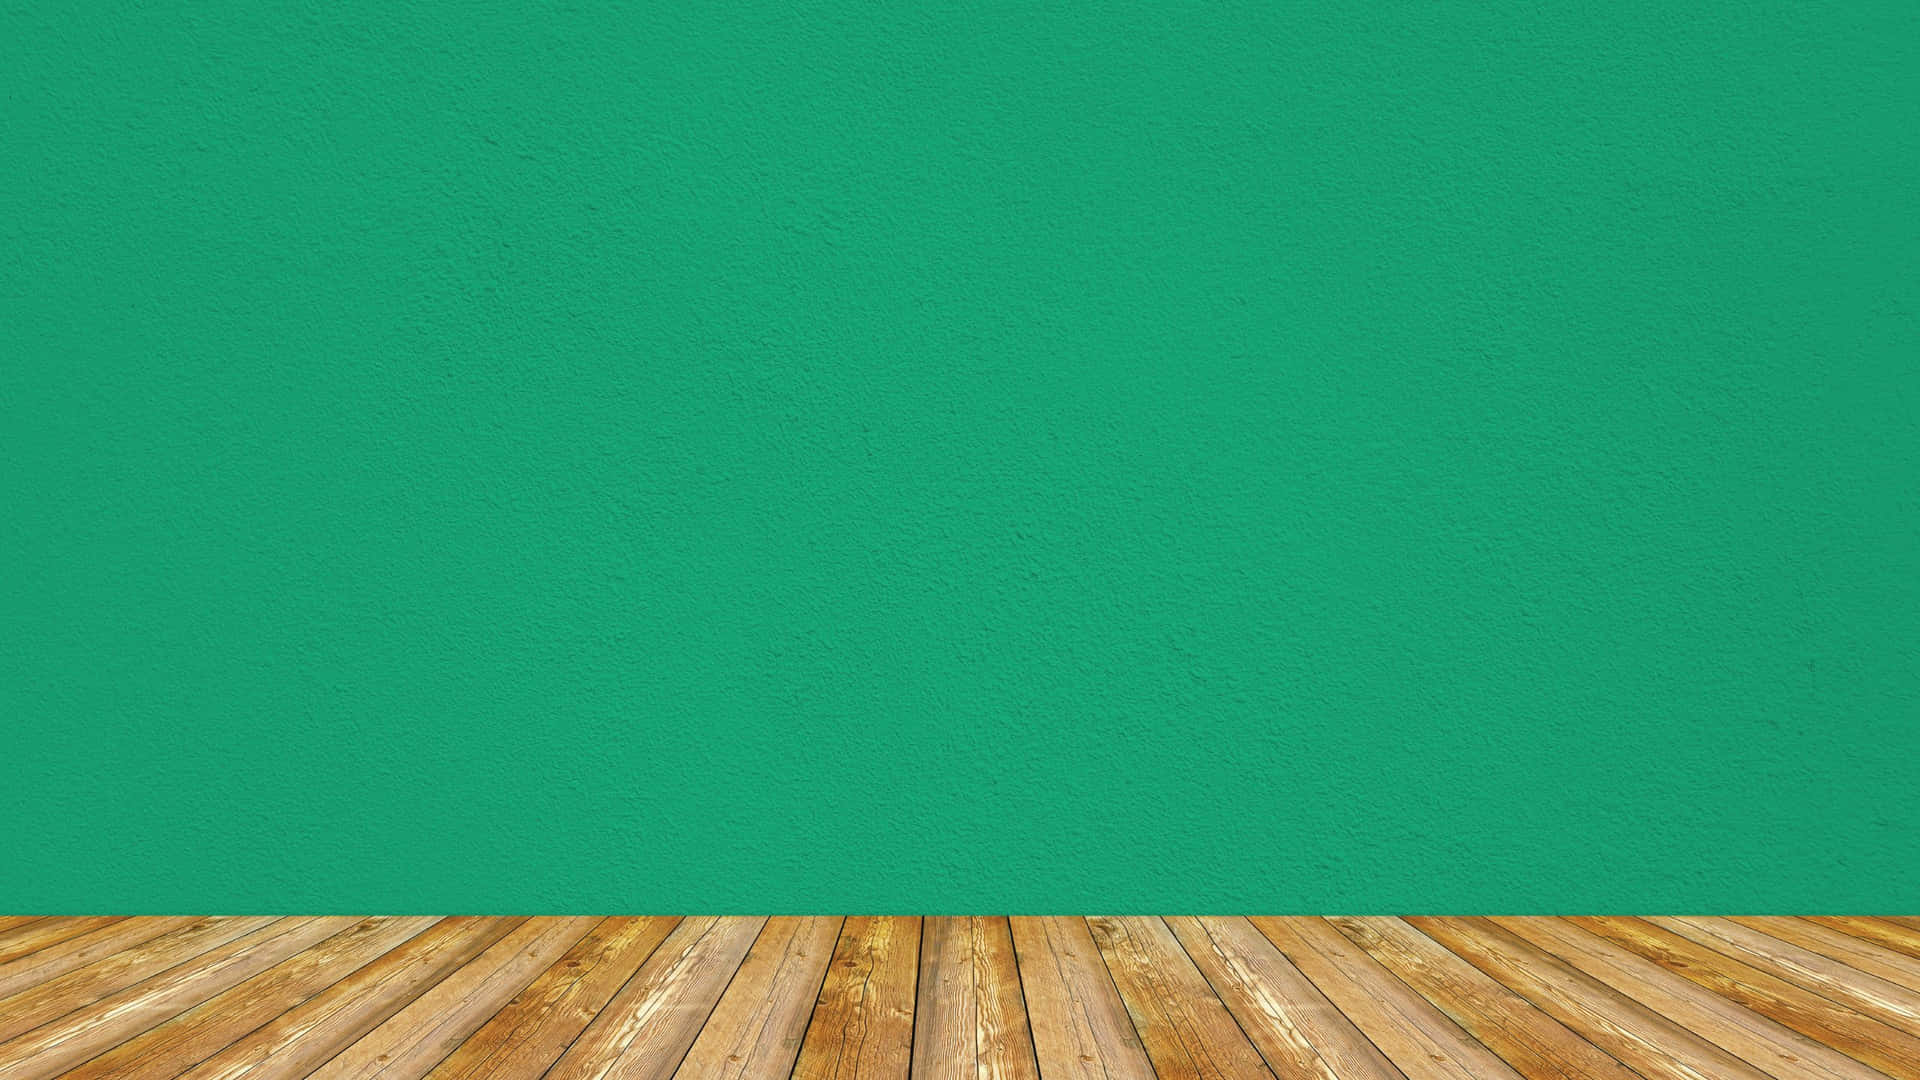 Solid Green Wall Background